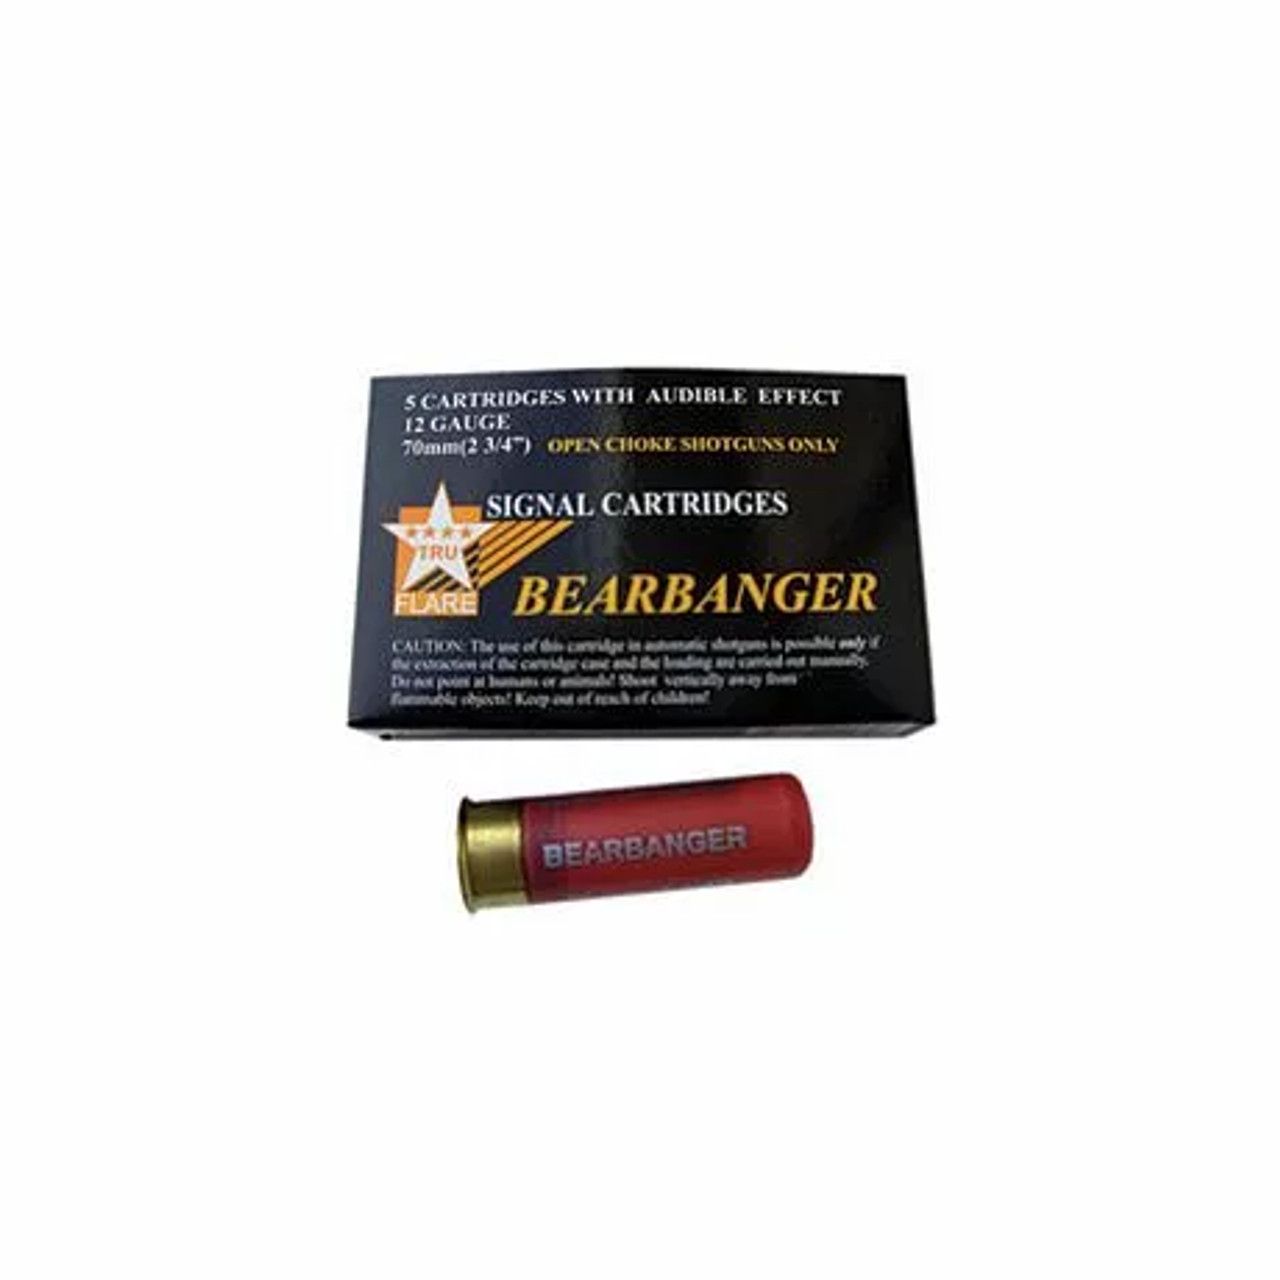 TruFlare Bearbanger, 12Ga 2 3/4″ – 5Rds

Explode with a tremendous bang at the end of a 150 ft flight. Perfect for wildlife deterrent. Must be fired from an open-choke shotgun. 5 cartridges per pack.

Specifications:
Type: Banger
Caliber: 12Ga
Shell Length: 2 3/4″
Package Quantity: 5 rounds